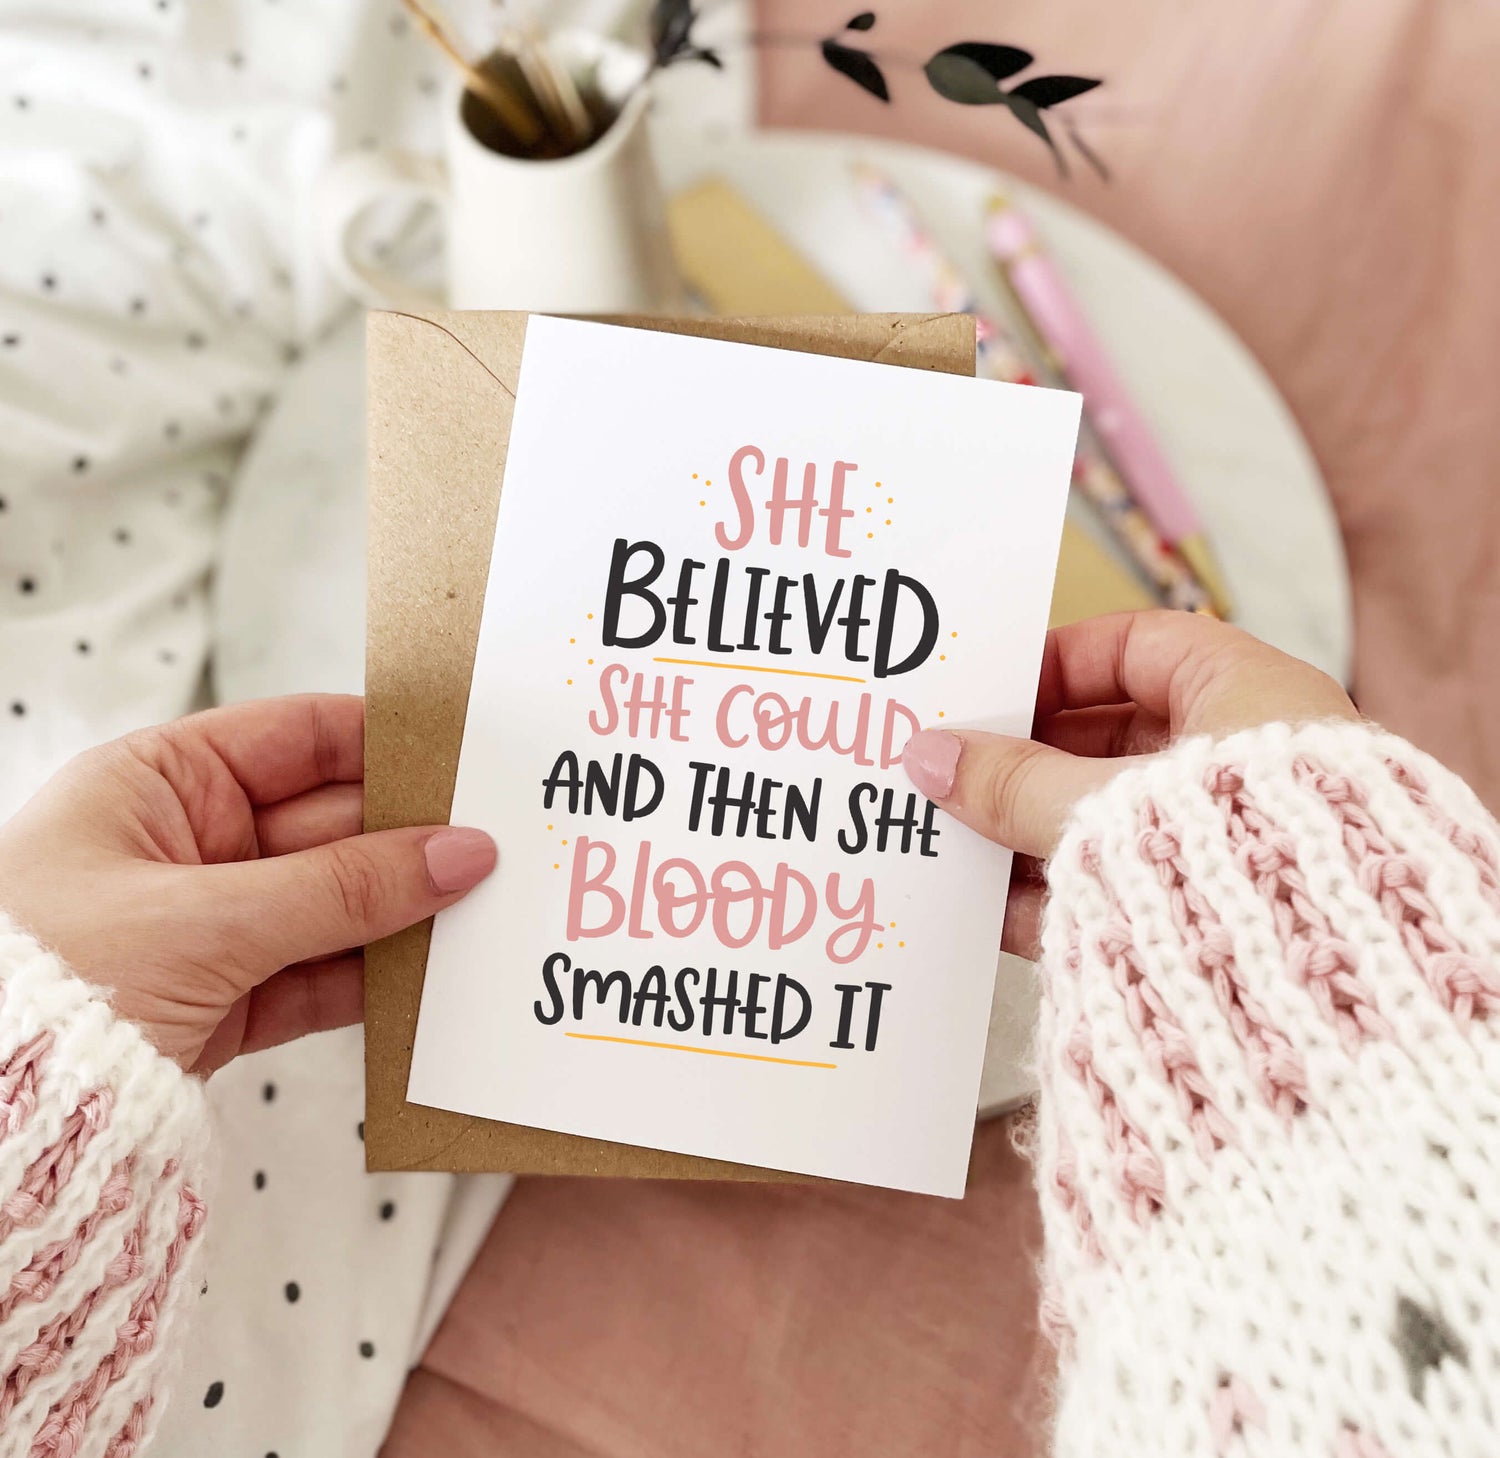 She believed she could and then she bloody smashed it greeting card by Abbie Imagine